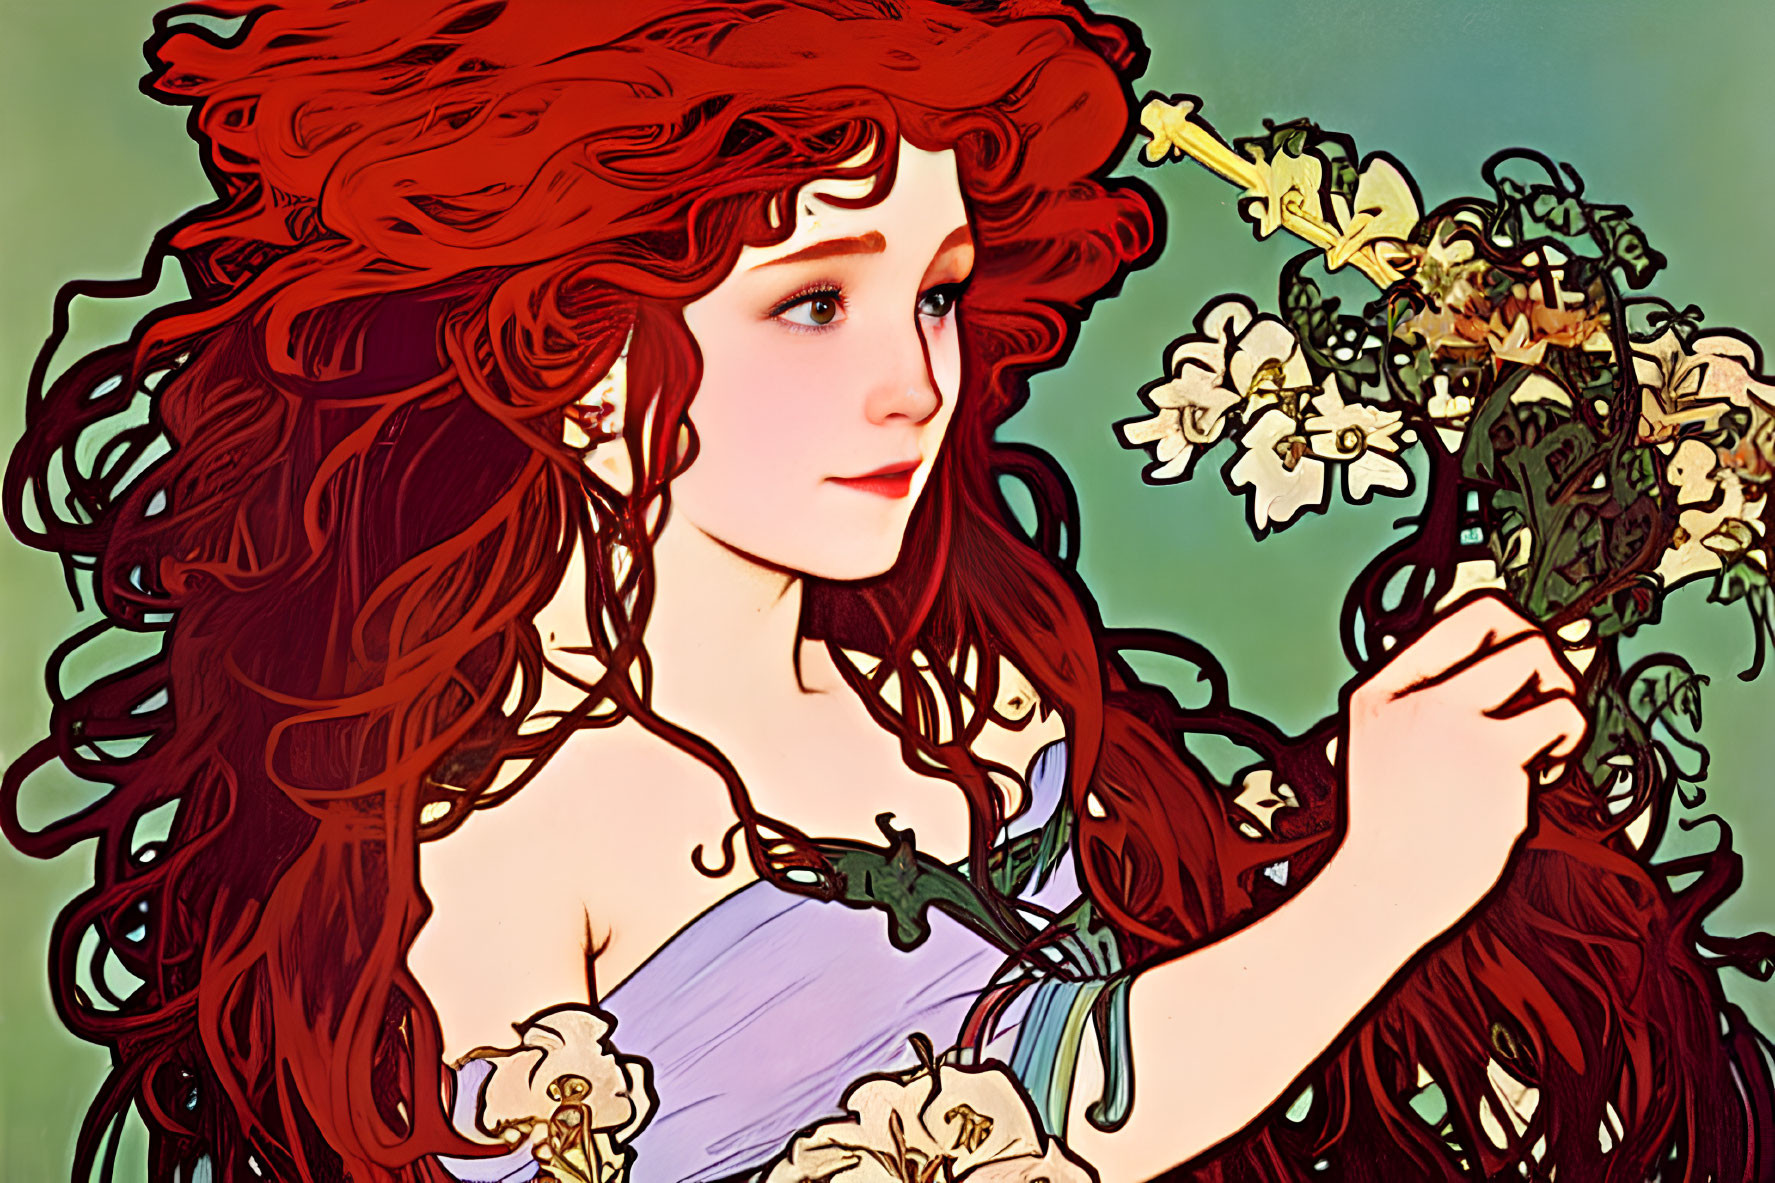 Detailed Art Nouveau-style illustration of woman with red hair and flowers